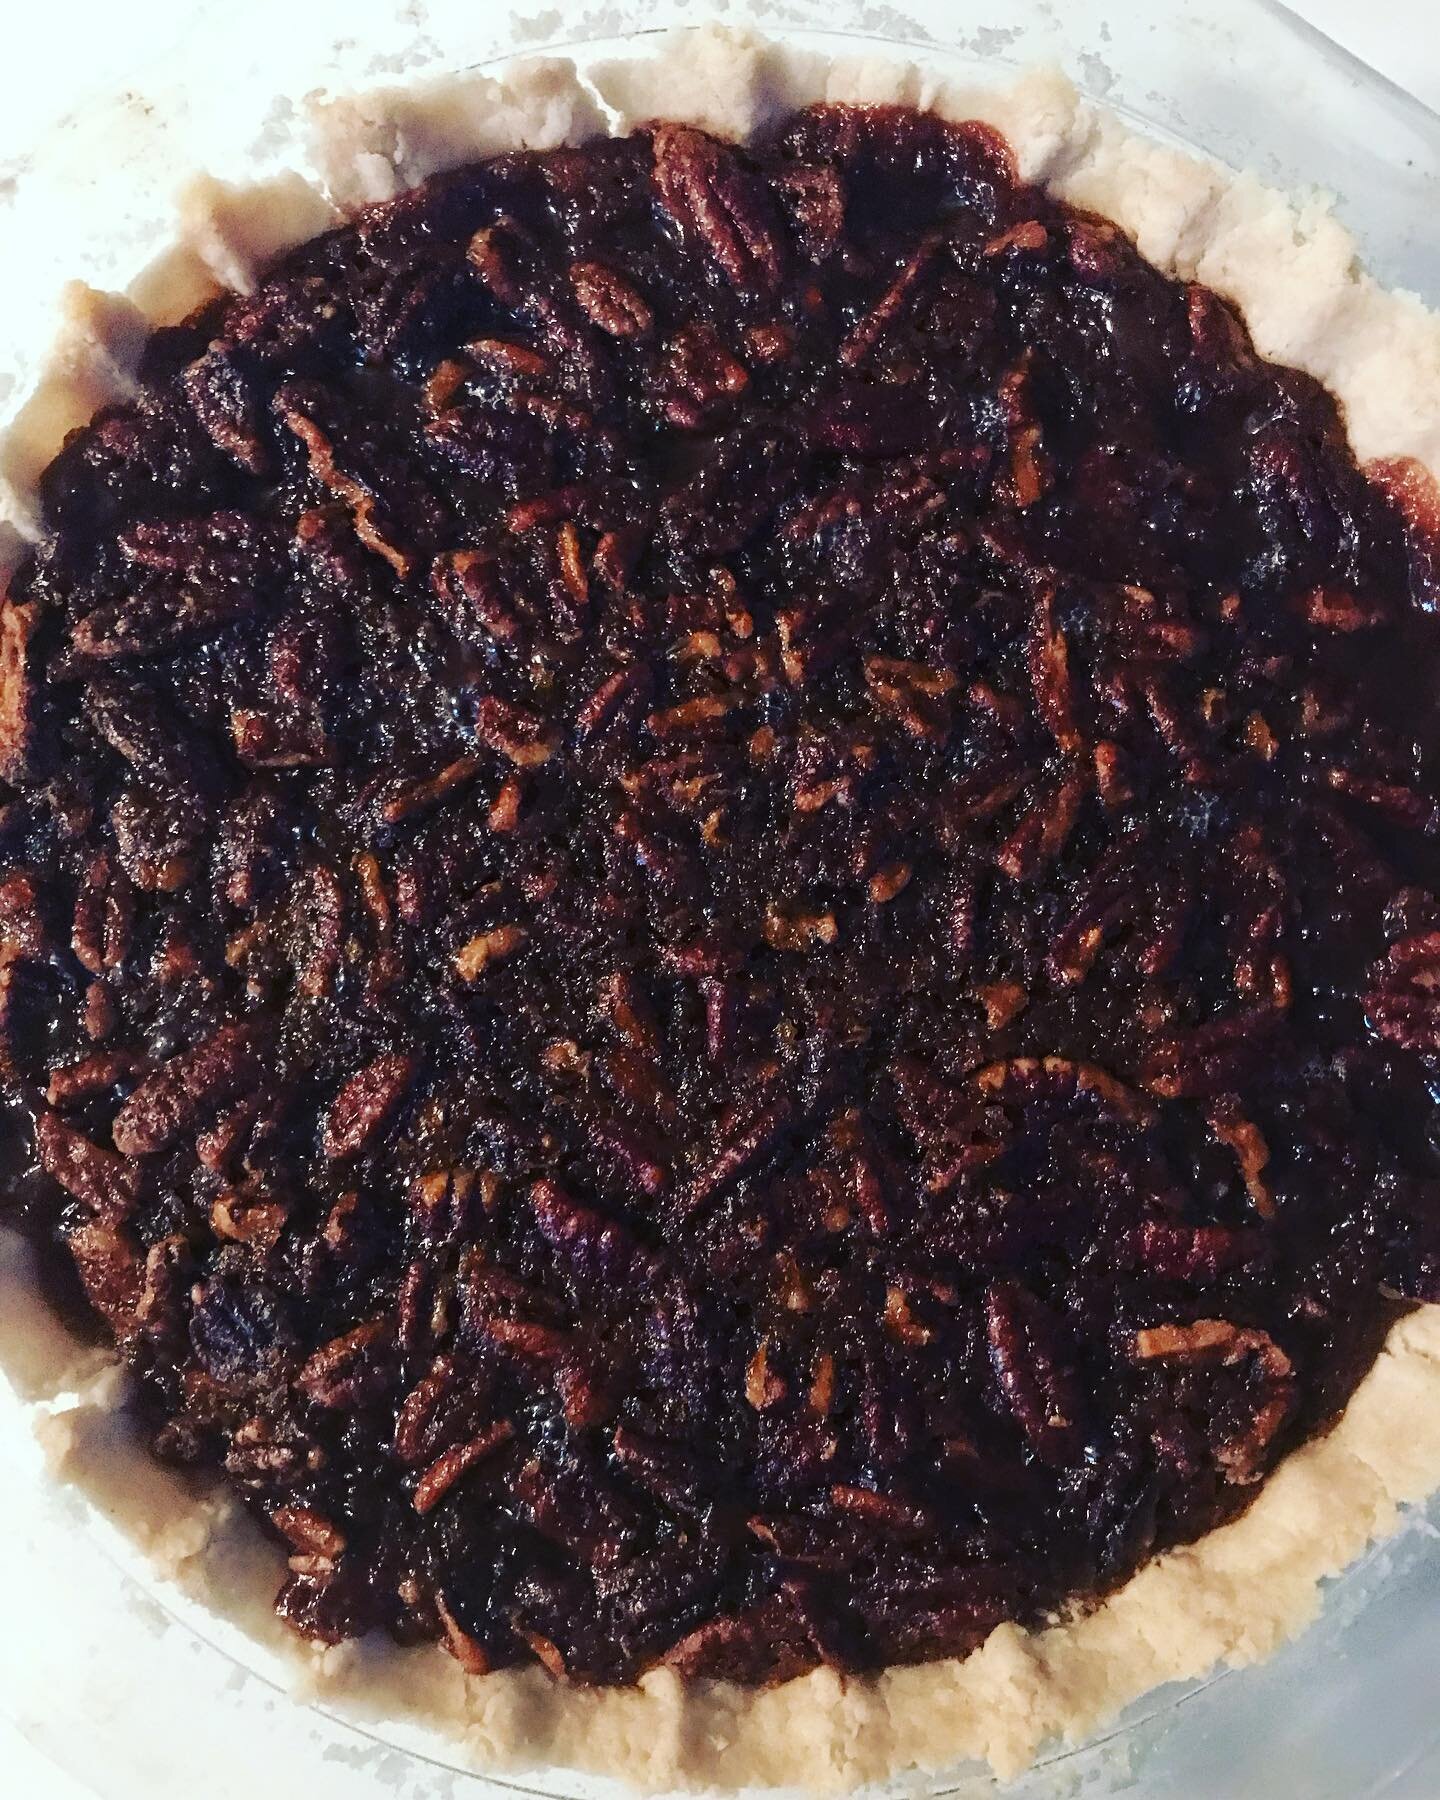 #vegan#glutenfree#pecanpie 💕 I honestly wasn&rsquo;t sure how this was going to turn out but it&rsquo;s good, really good. I kept the first one and made another for here haha. 🤤 If you forgot you have somebody with a special diet stopping by I&rsqu